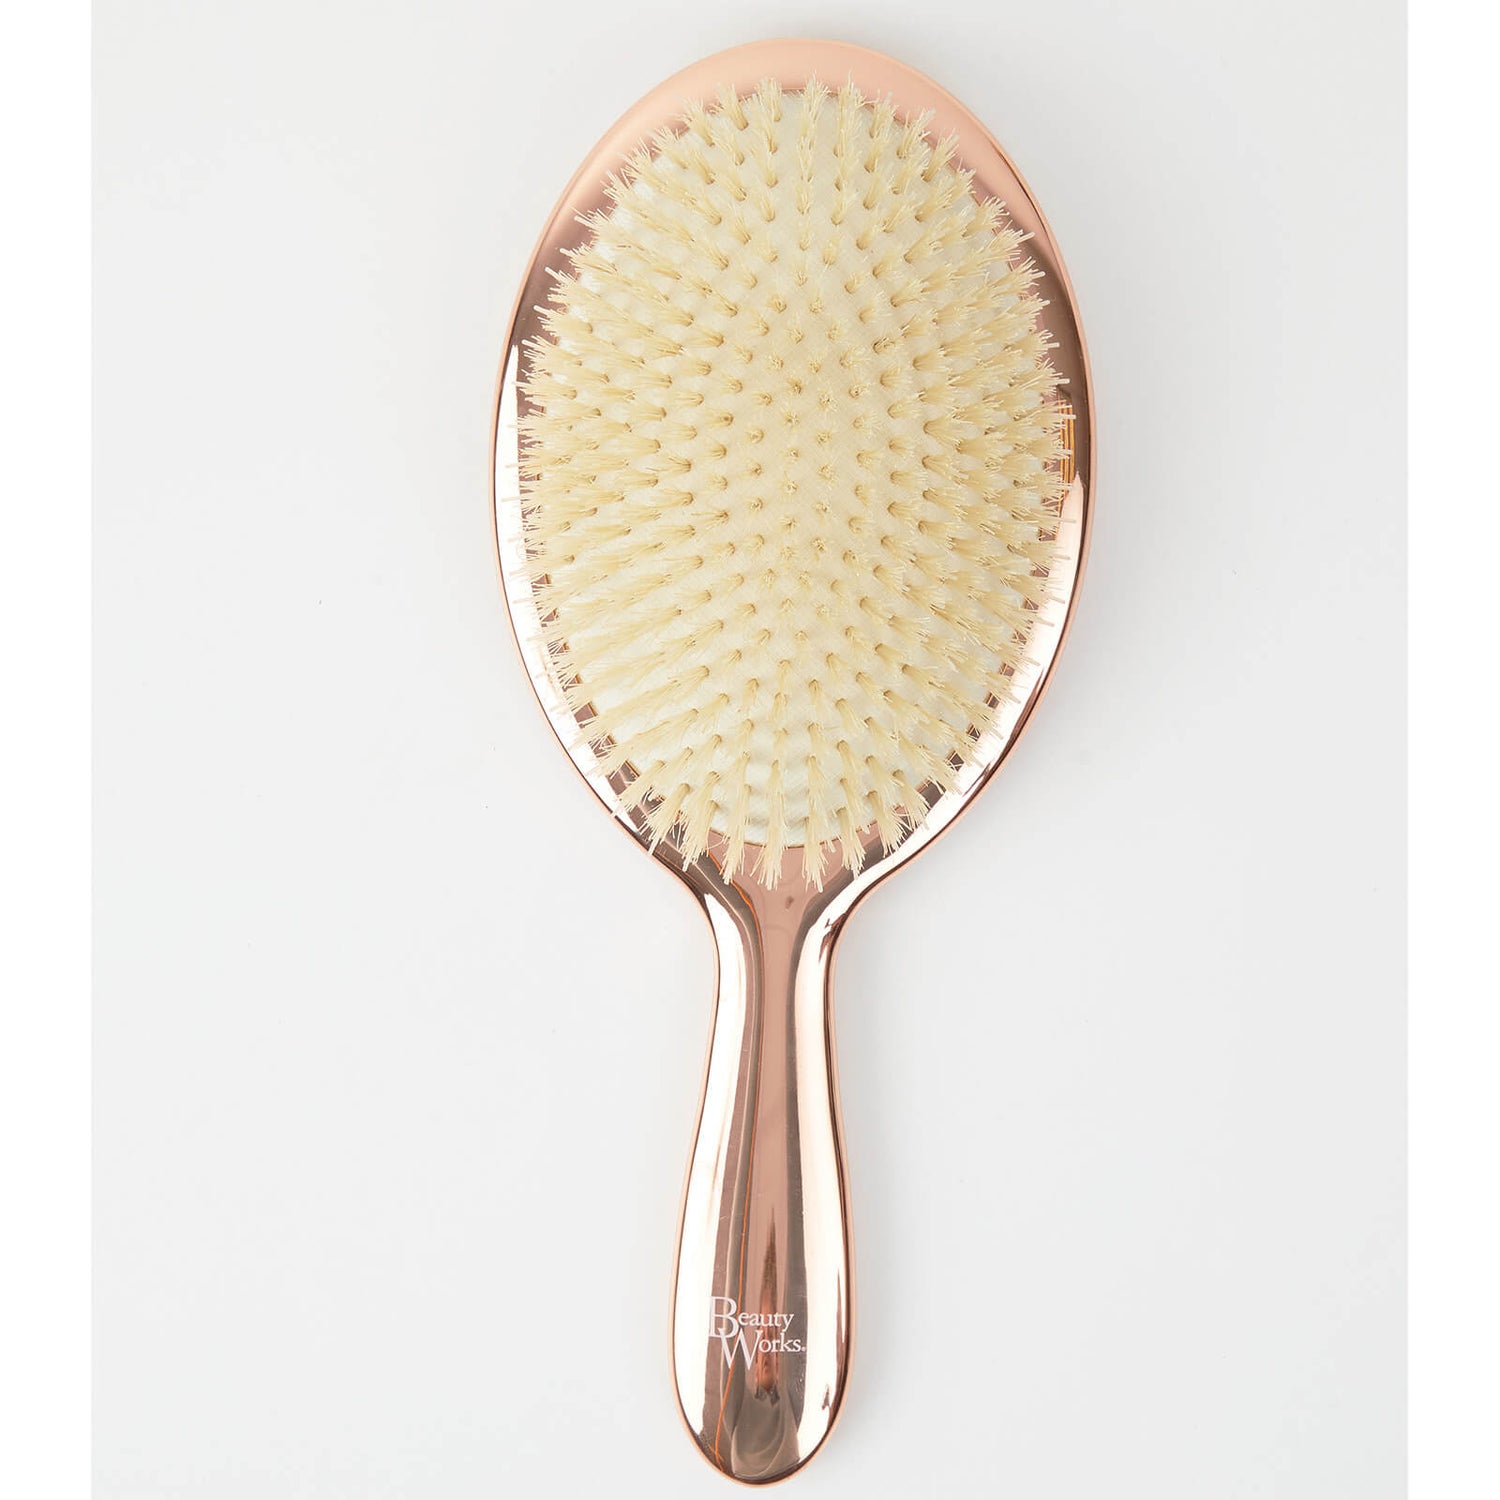 Beauty Works Limited Edition Boar Bristle Brush